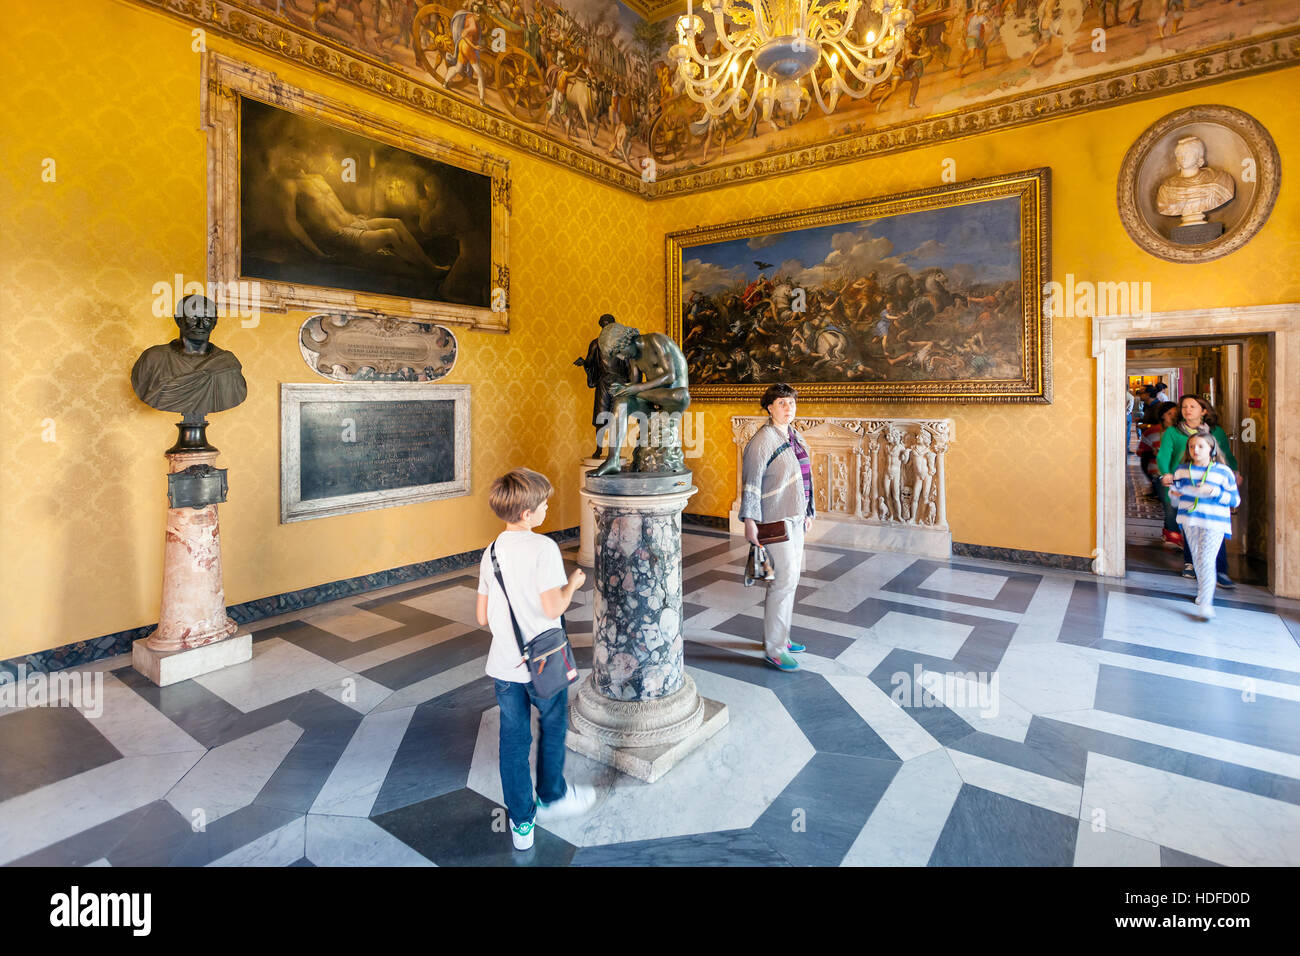 ROME, ITALY - OCTOBER 31, 2016: people in room of Capitoline Museums in Palazzo dei Conservatori (Palace of the Conservators) in Rome. Art and Archeol Stock Photo